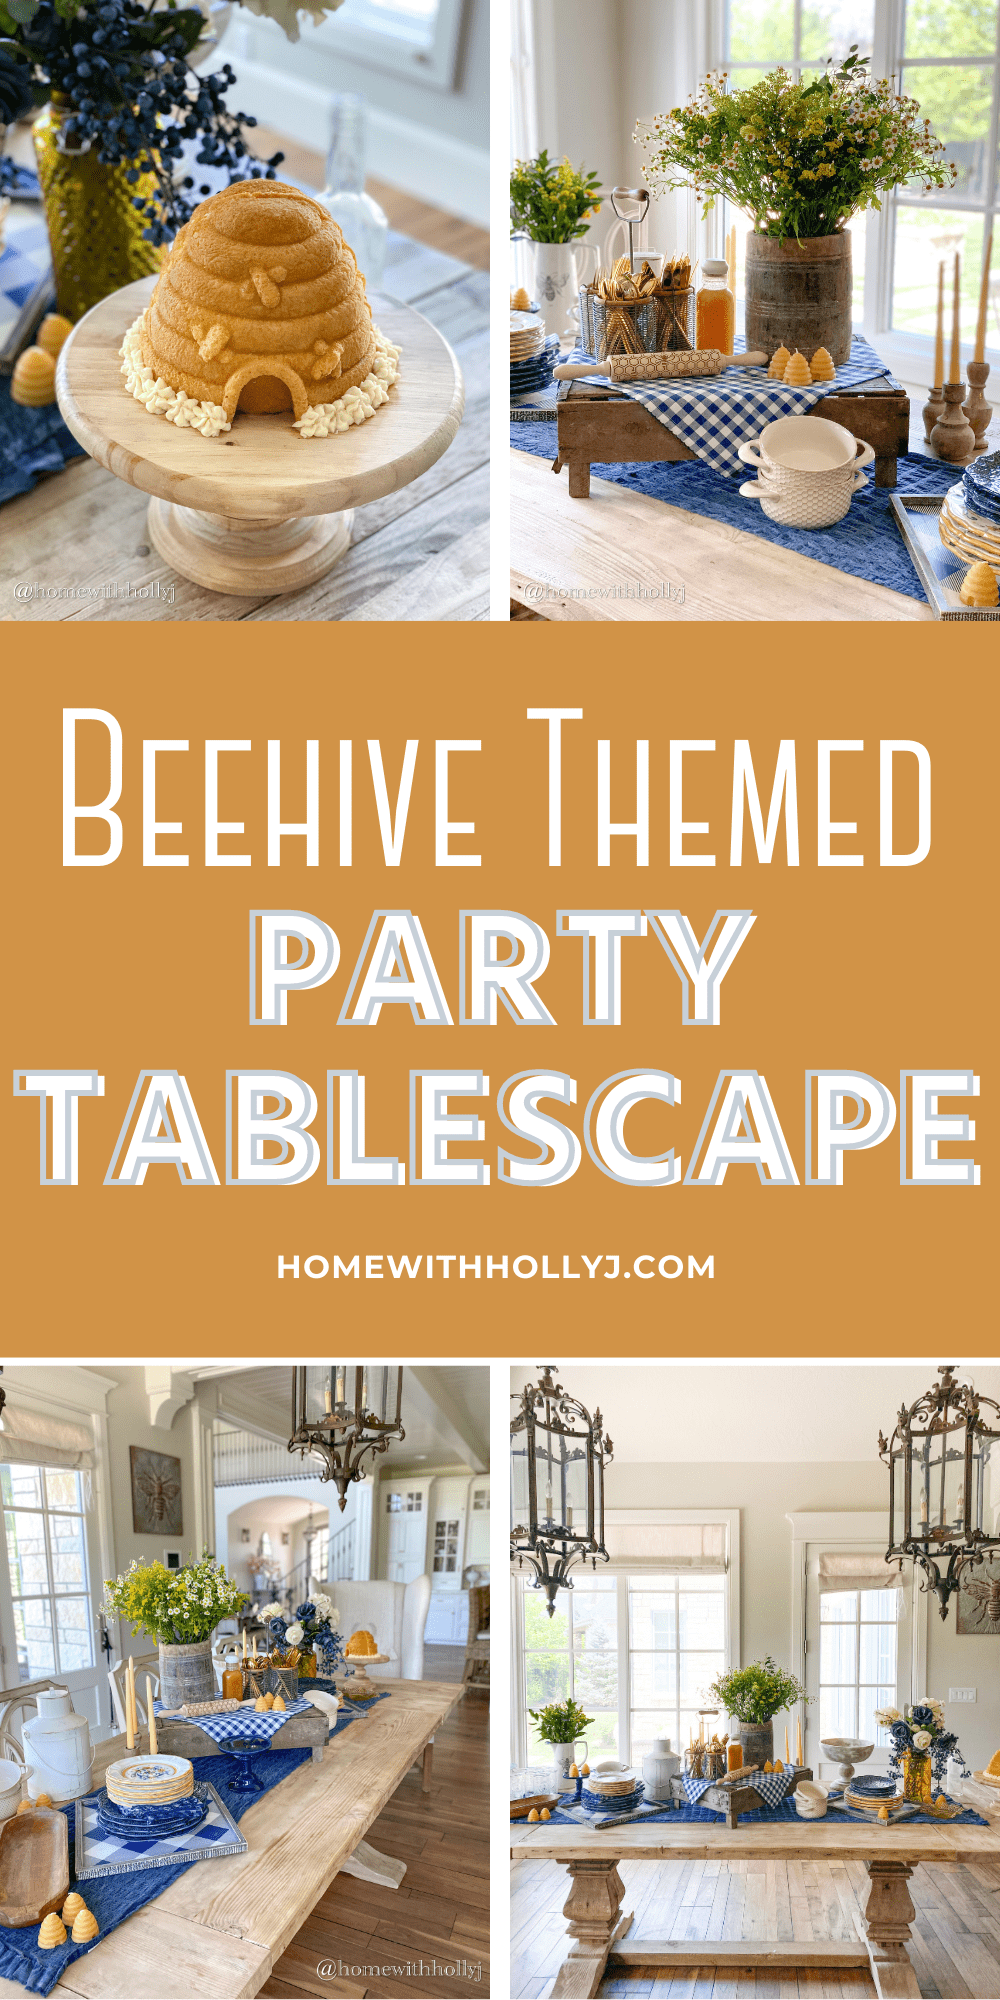 Since Utah is the Beehive State, today I am sharing my bee themed party tablescape inspiration featuring all things beehive!